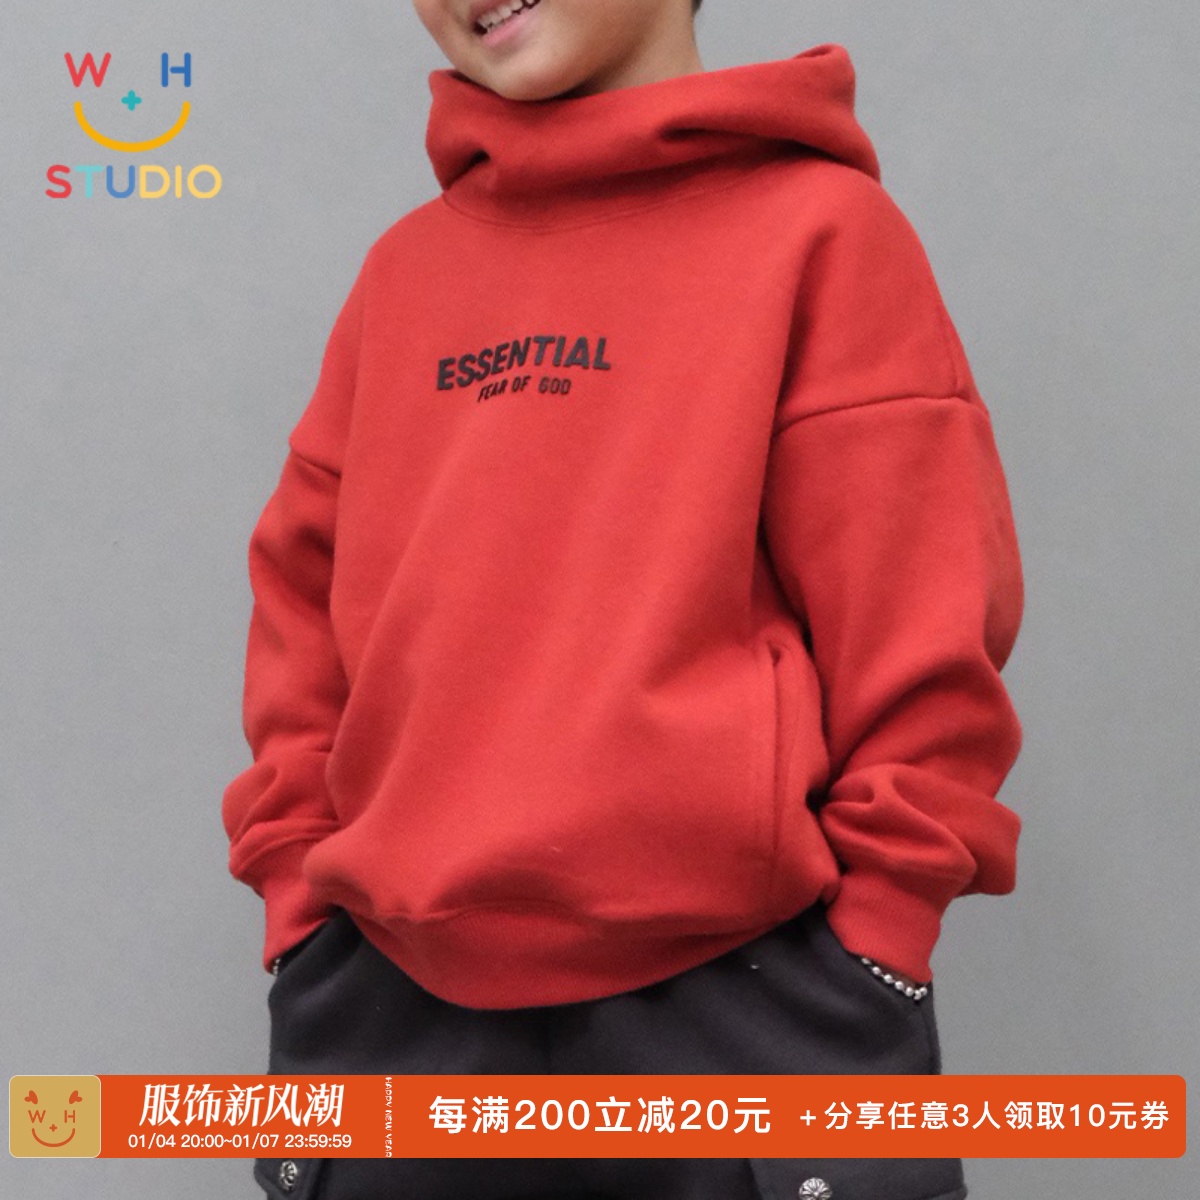 William) pro-son dress New Year's suit European and American Chauded boy Daughter Boy Dress Gush ESS red Lianhood-Taobao